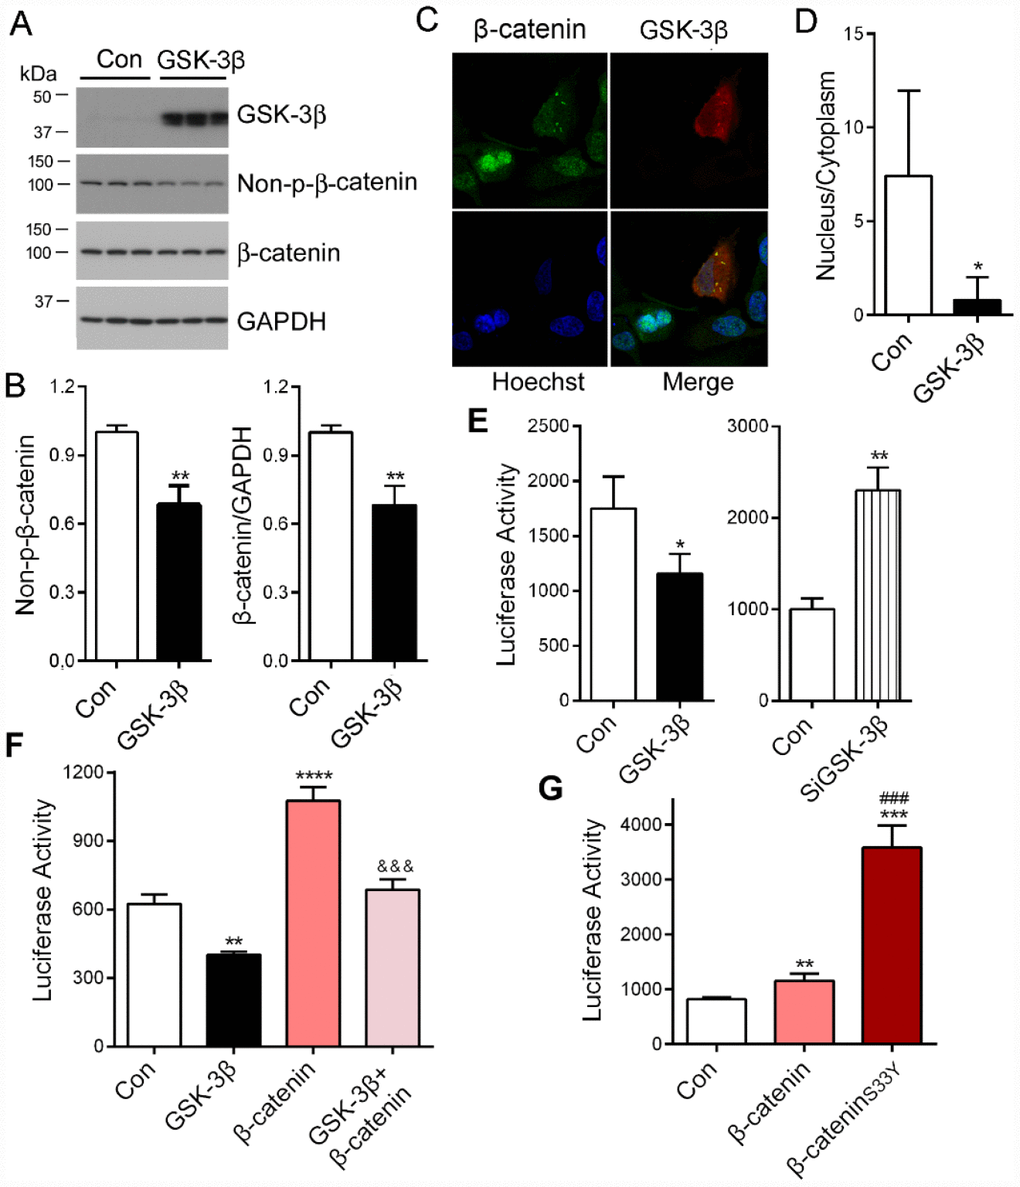 PME-1 expression is regulated by GSK-3β/β-catenin pathway. (A, B) HEK-293T cells were transiently transfected with GSK-3β. Levels of PME-1, β-catenin, GSK-3β, and Non-pS-β-catenin (dephosphorylated β-catenin at Ser33, Ser37 and Thr41) were analyzed by Western blots and normalized with GAPDH or corresponding proteins (B). (C, D) HA-tagged GSK-3β was overexpressed in HeLa cells and immuno-stained by polyclonal rabbit anti-β-catenin or mouse monoclonal anti-HA (GSK-3β) followed by florescence labeled anti-rabbit (green) or anti-mouse (red) second antibodies, respectively (C). The fluorescence levels of the nucleus and the cytoplasm were measured by IMAGE J and nucleus/cytoplasm ratio of β-catenin was analyzed (D). (E) pGL4/PME-1-1000 were co-transfected with GSK-3β or siGSK-3β in HEK-293T cells. The luciferase activity was measured. (F) HEK-293T cells were co-transfected with β-catenin and/or GSK-3β with pGL4/PME-1-1000. The luciferase activity was measured. *: compared with control (Con). &: compared with β-catenin. (G) The luciferase activity as measured. *: compared with control (Con), #: compared with β-catenin. Data are presented as mean ± SD (n=3), *P 